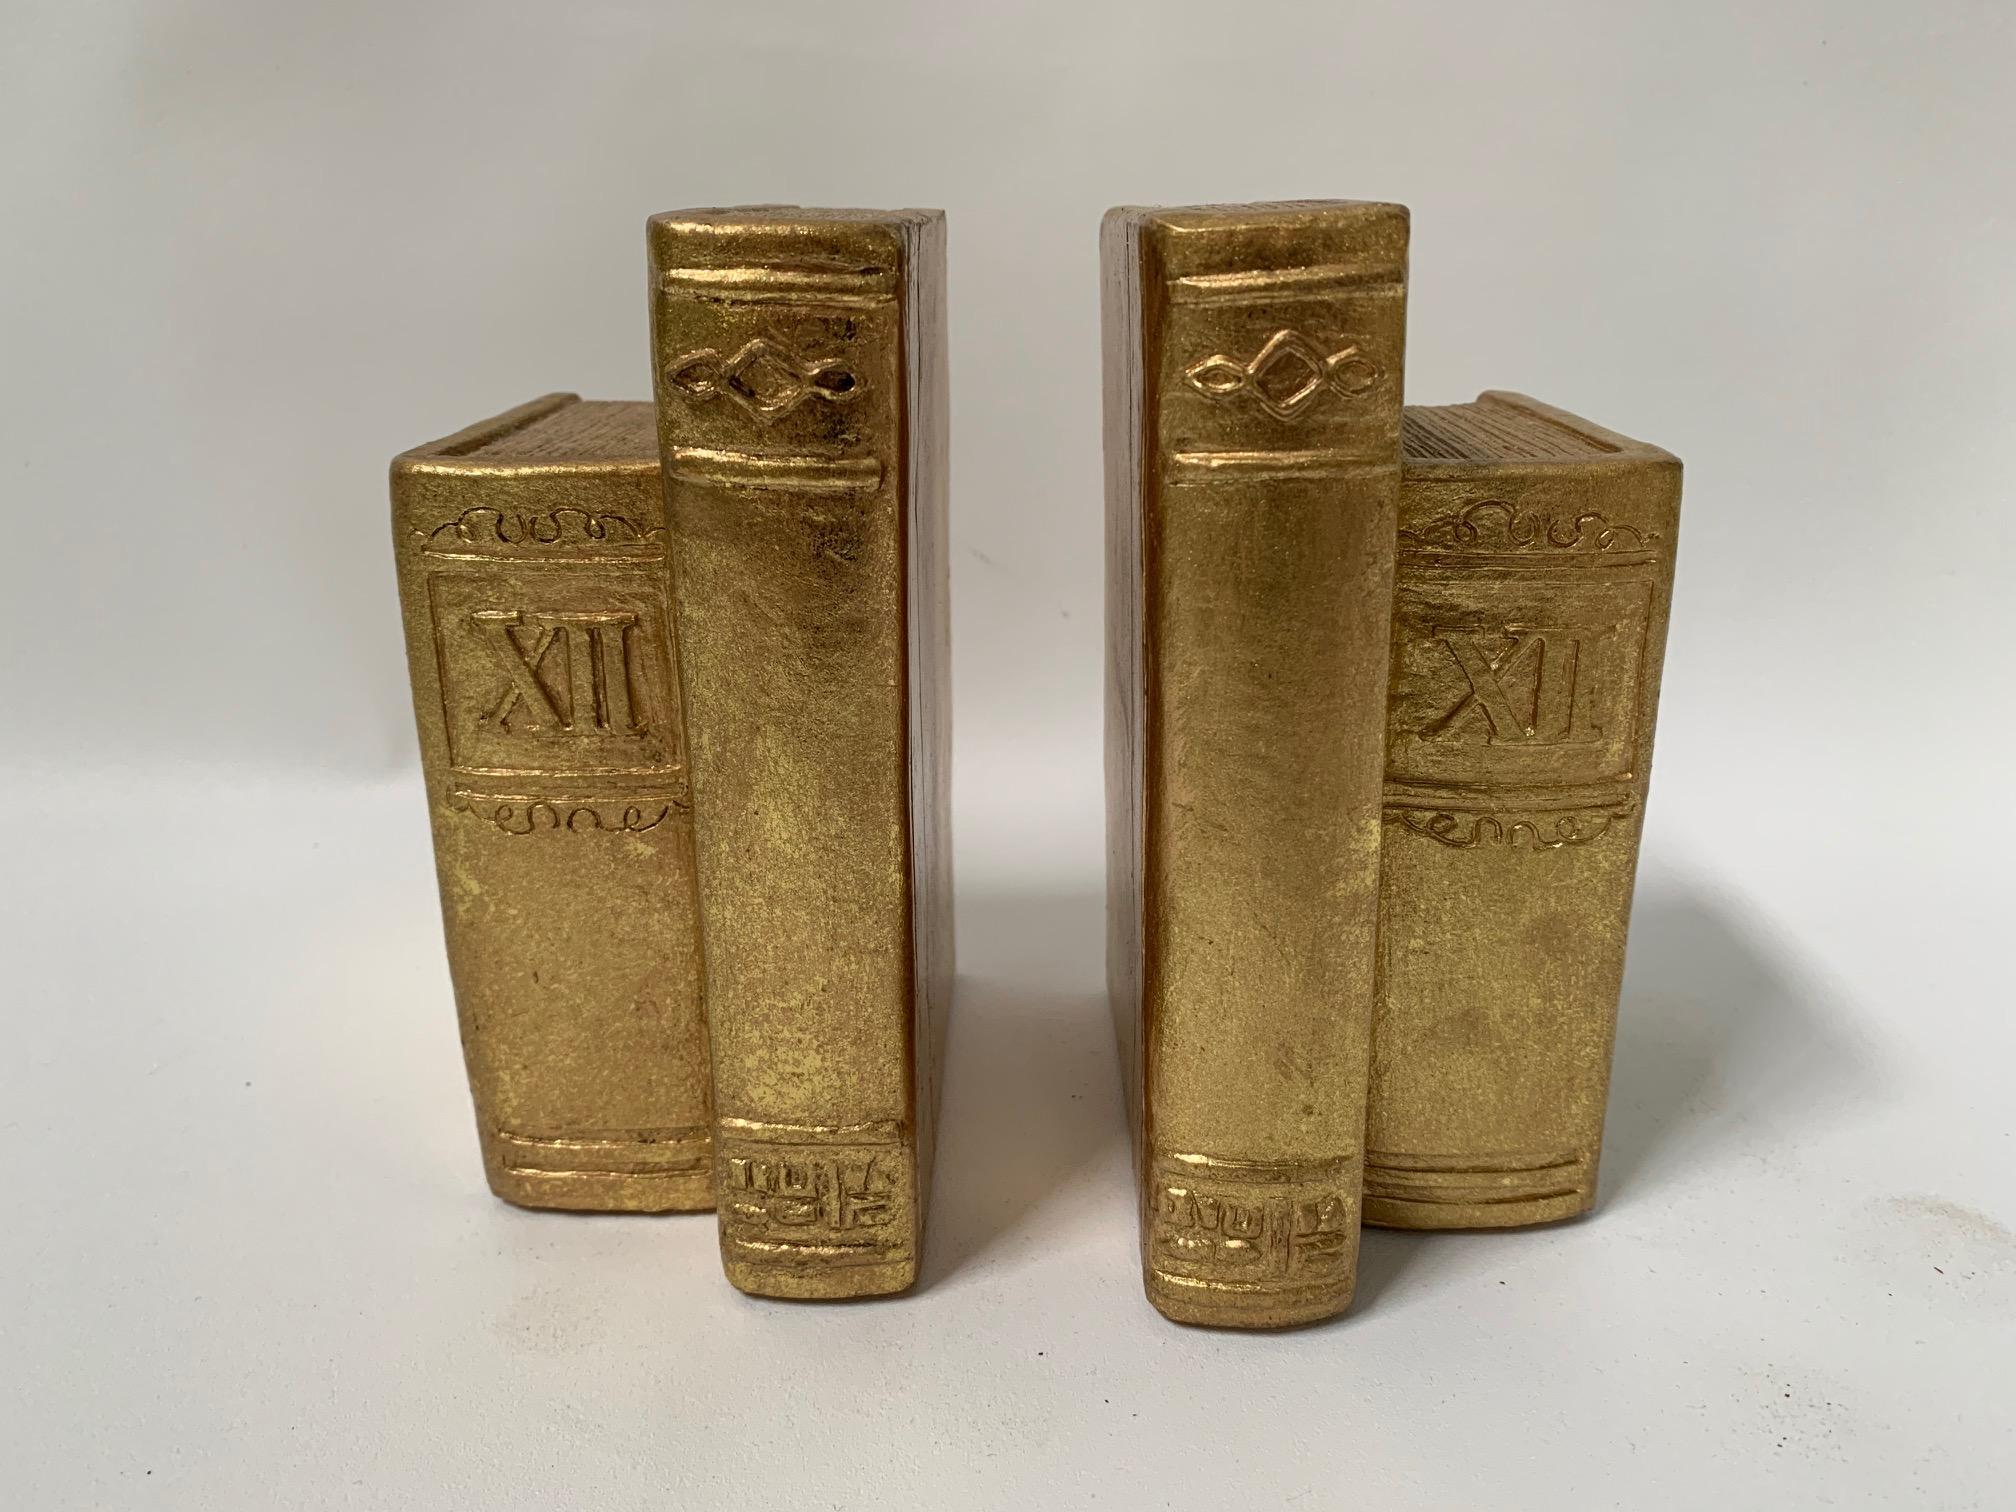 Pair of bookends in the form of standing books finished in gold gilding. Great vintage condition.